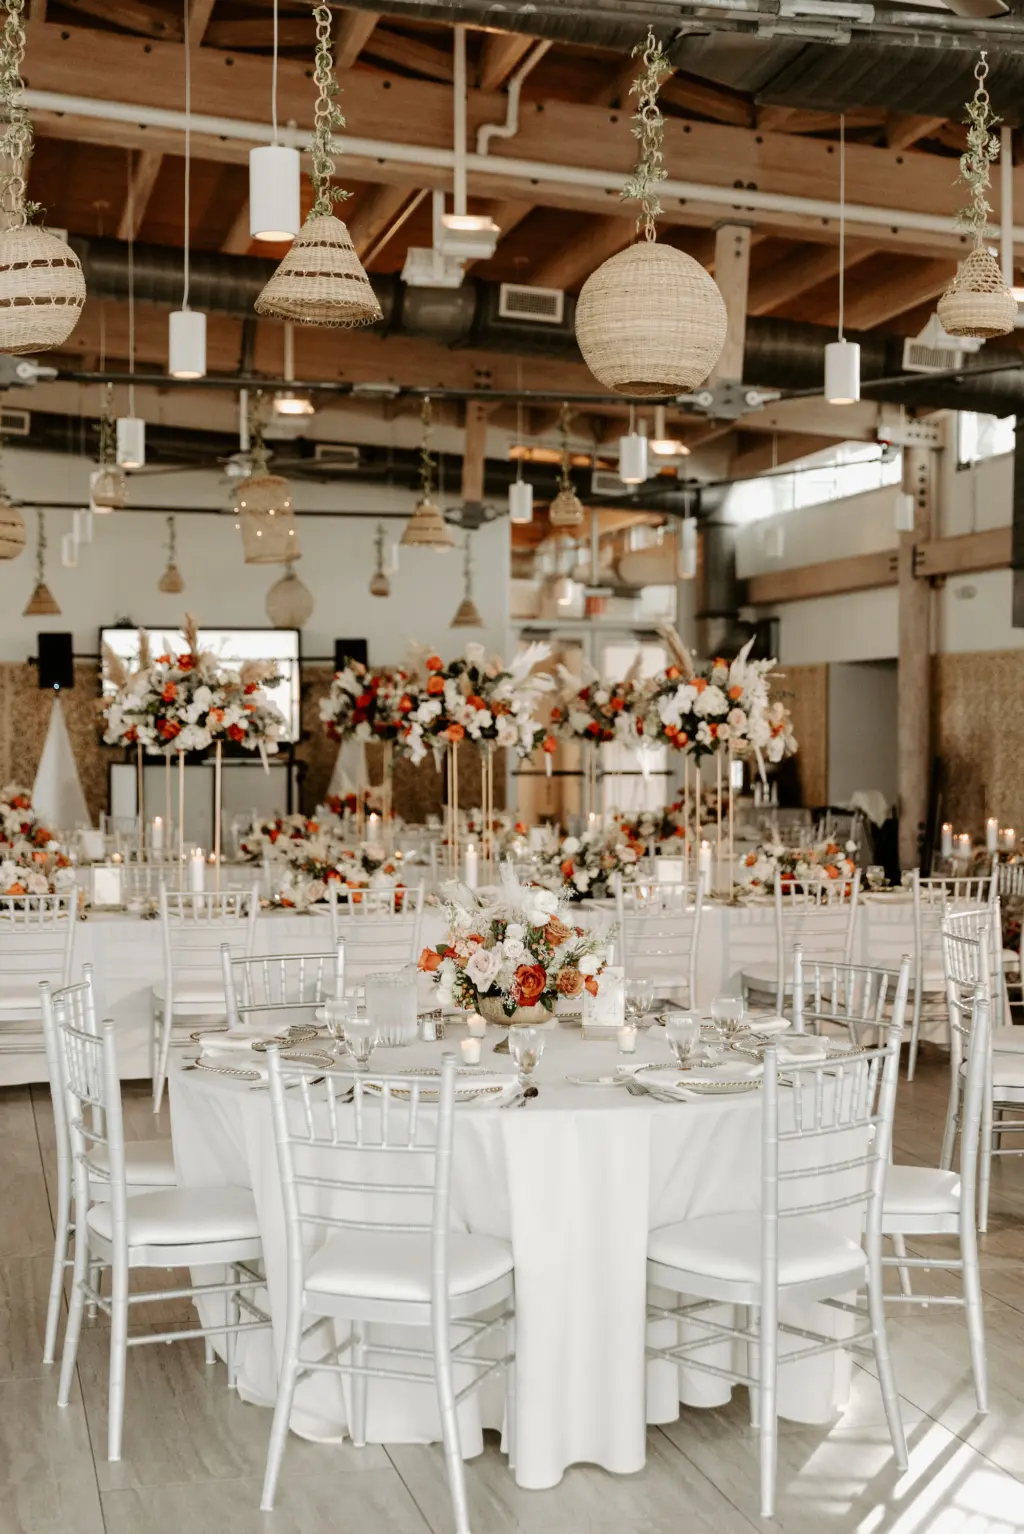 Boho Wedding Reception Inspiration | Rattan Hanging Lanterns | Silver Chiavari Chairs with White Linen and Long Feasting Tables | Orange, Pink, and White Roses with Greenery Centerpiece Ideas | Downtown Tampa Planner Breezin Weddings